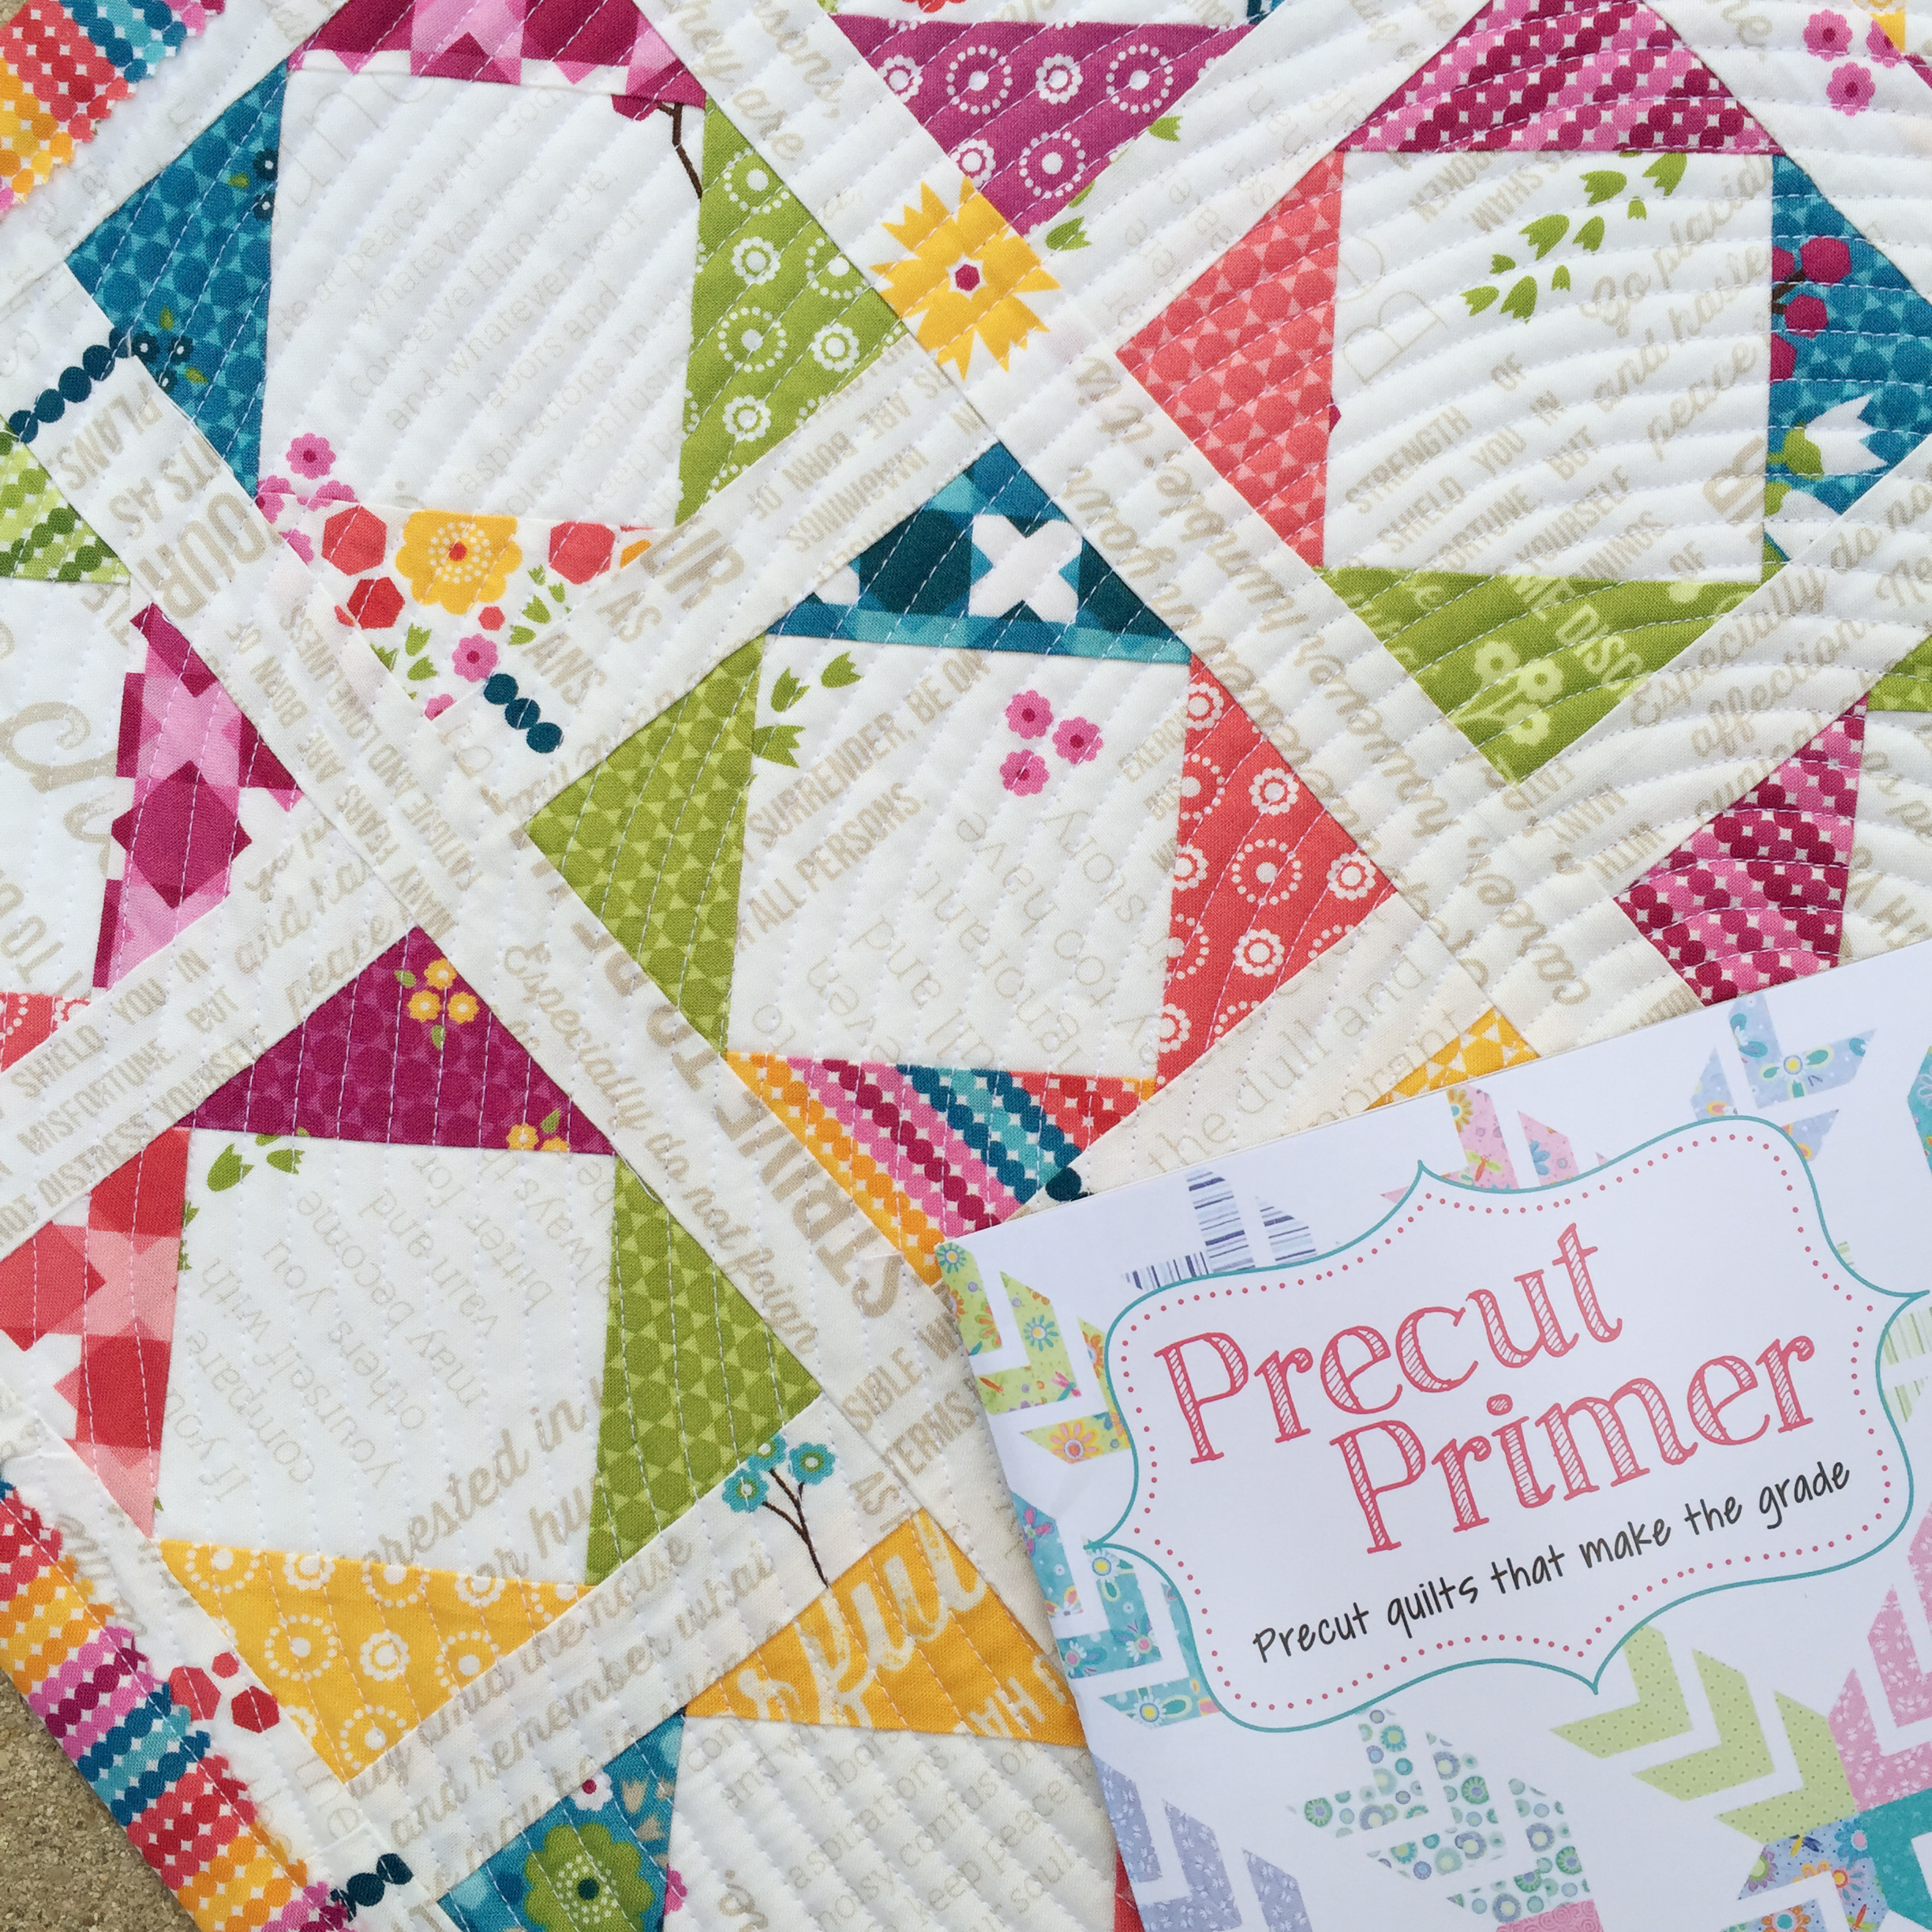 Second Grade Quilt by April Rosenthal from the book Precut Primer by Barb and Mary of Me and My Sister Designs www.aprilrosenthal.com